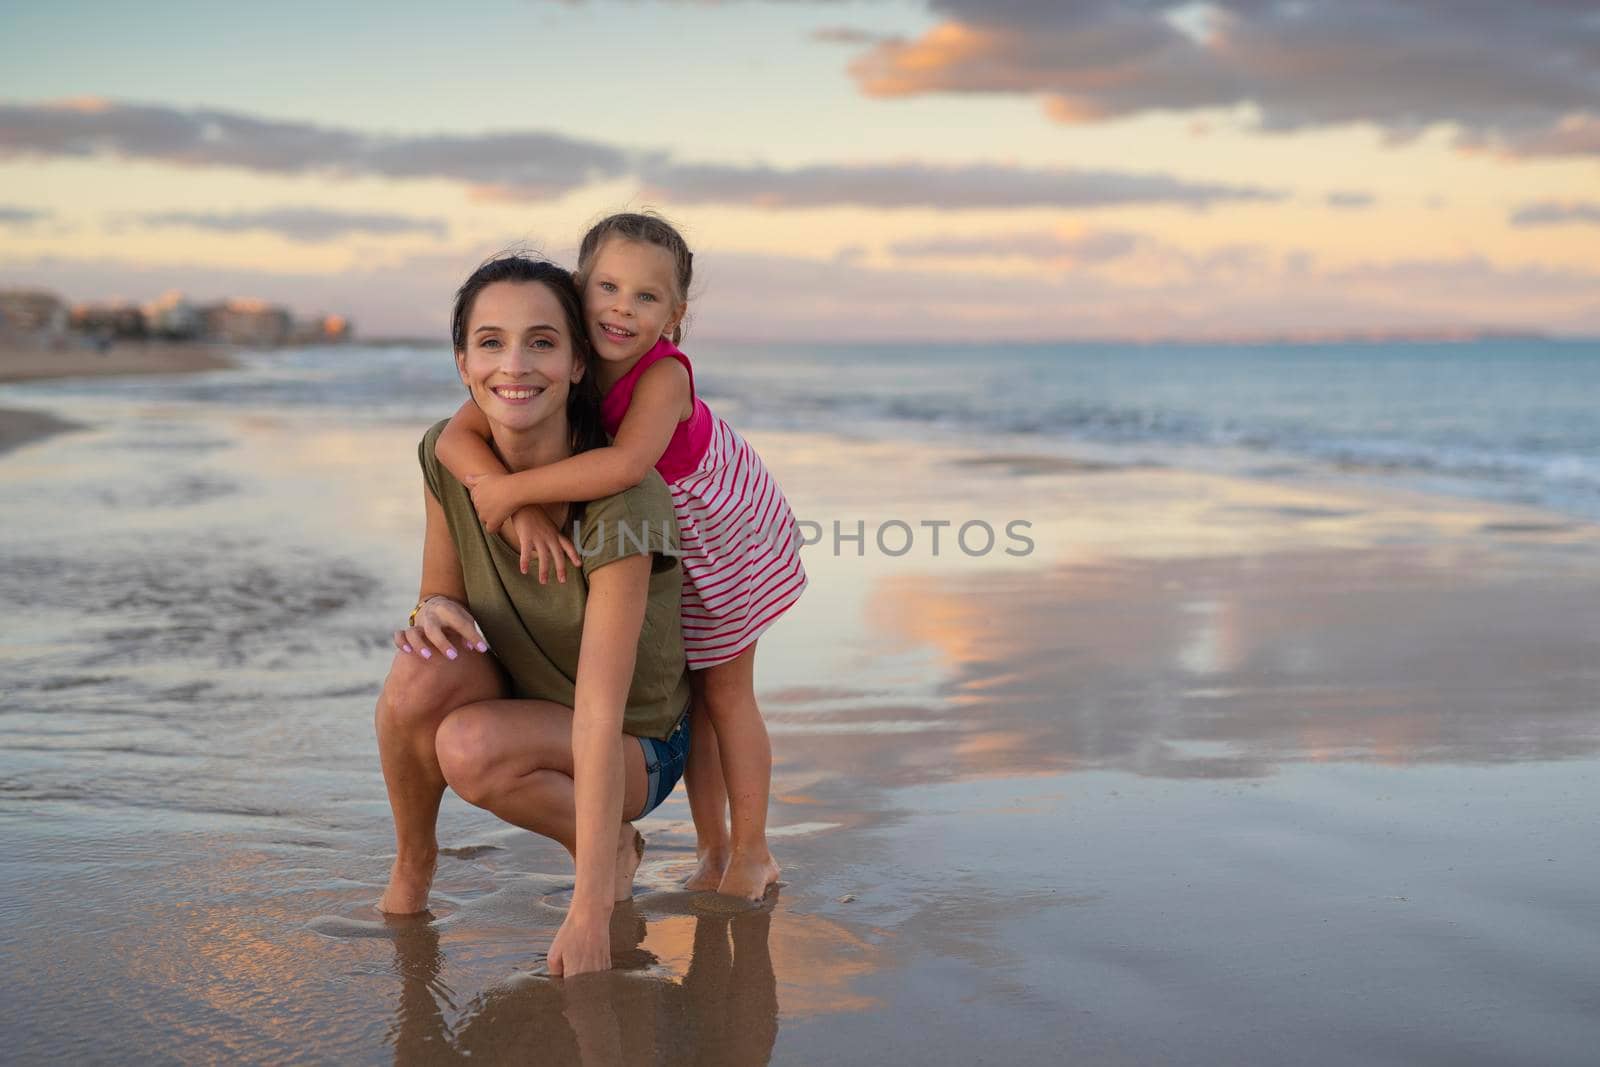 Happy family. Young happy beautiful mother and her daughter having fun on the beach at sunset. Positive human emotions, feelings.